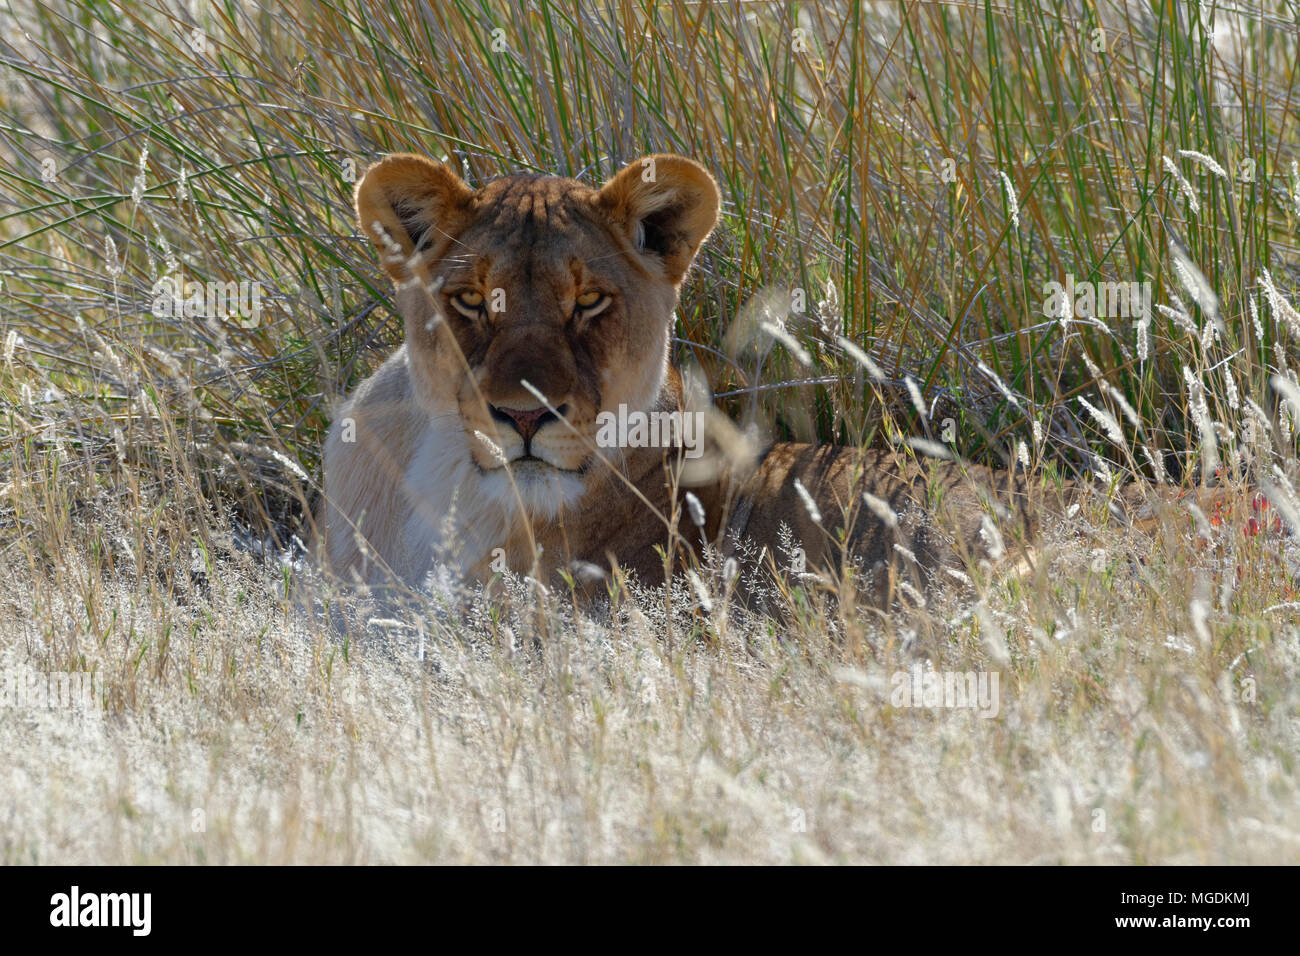 Lioness (Panthera leo) lying in the tall grass, head up, Etosha National Park, Namibia, Africa Stock Photo